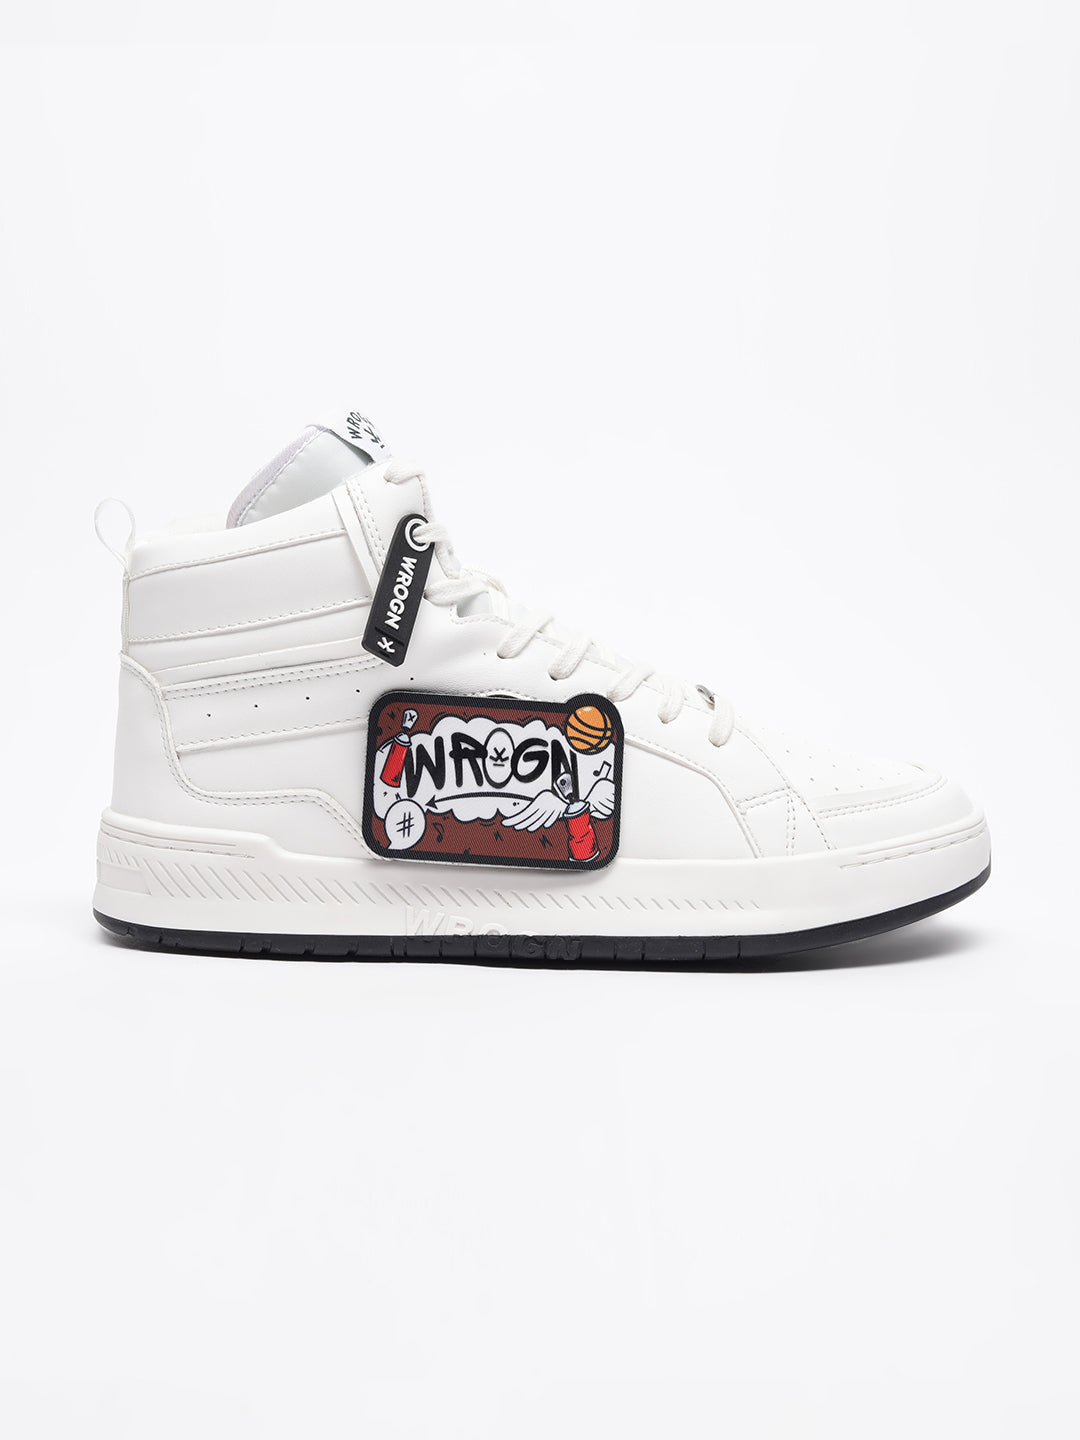 Wrogn Patch High Top Sneakers